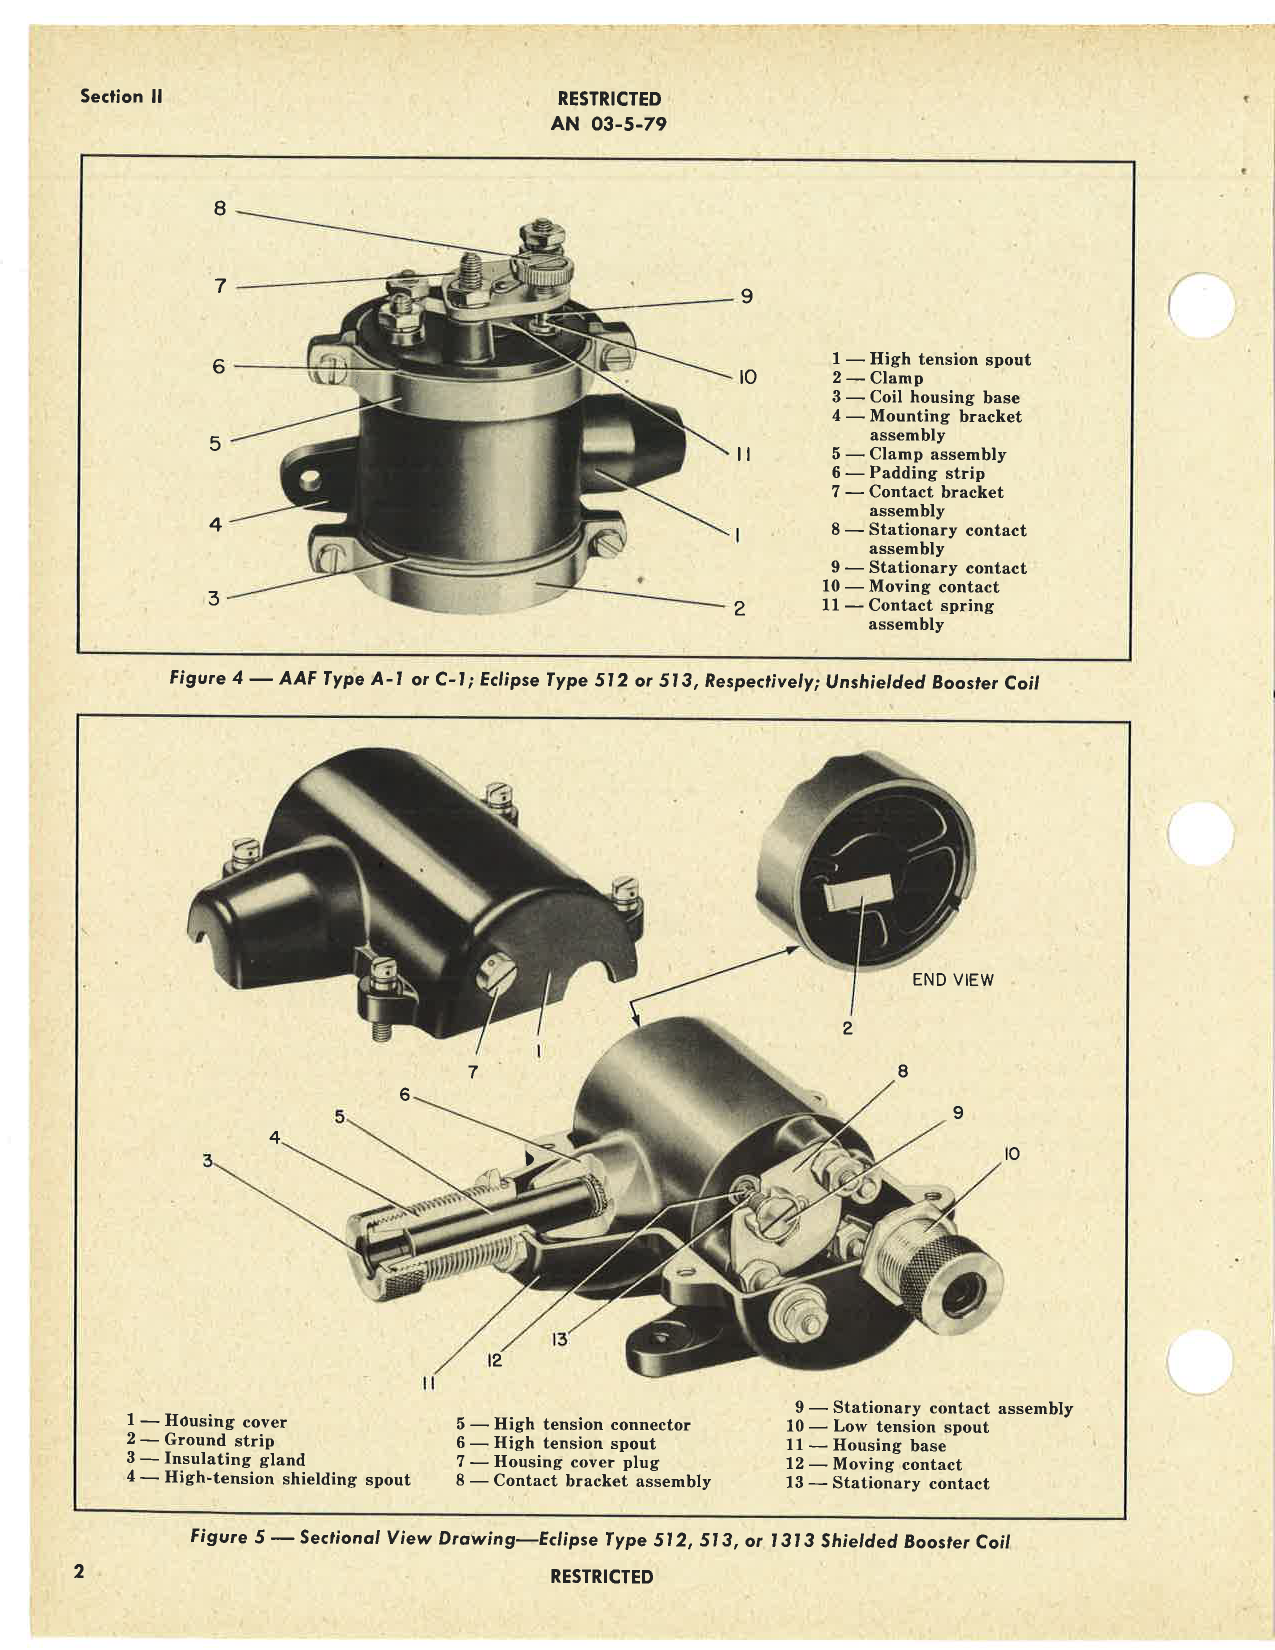 Sample page 6 from AirCorps Library document: Operation, Service & Overhaul Instructions with Parts Catalog for High Tension Booster Coils